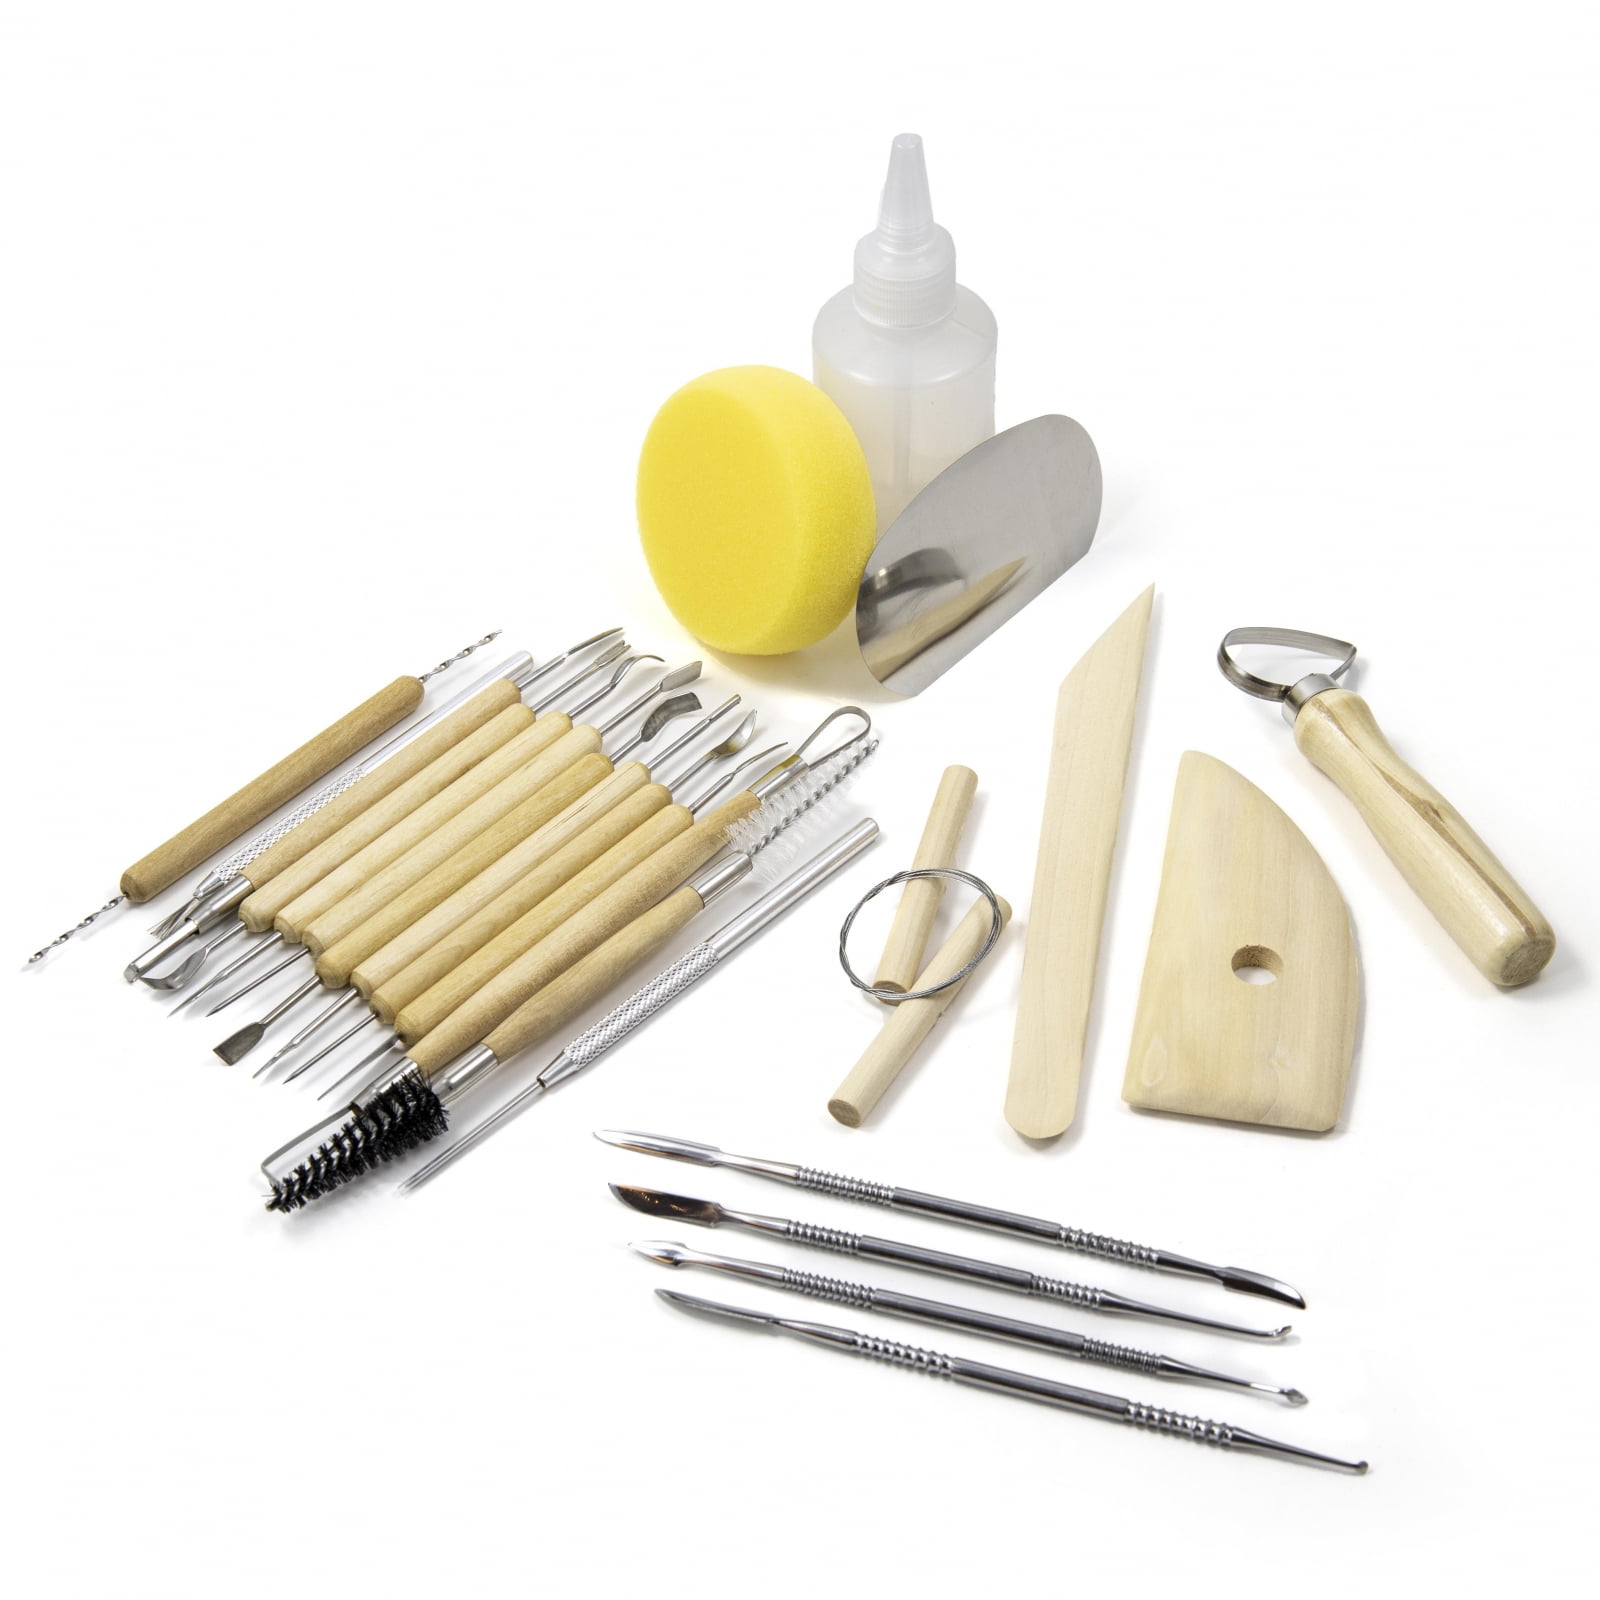 National Artcraft Potter's Tool Kit Contains 8 Essential Tools for Trimming, Shaping and Smoothing Pottery and Ceramic Clay Surfaces